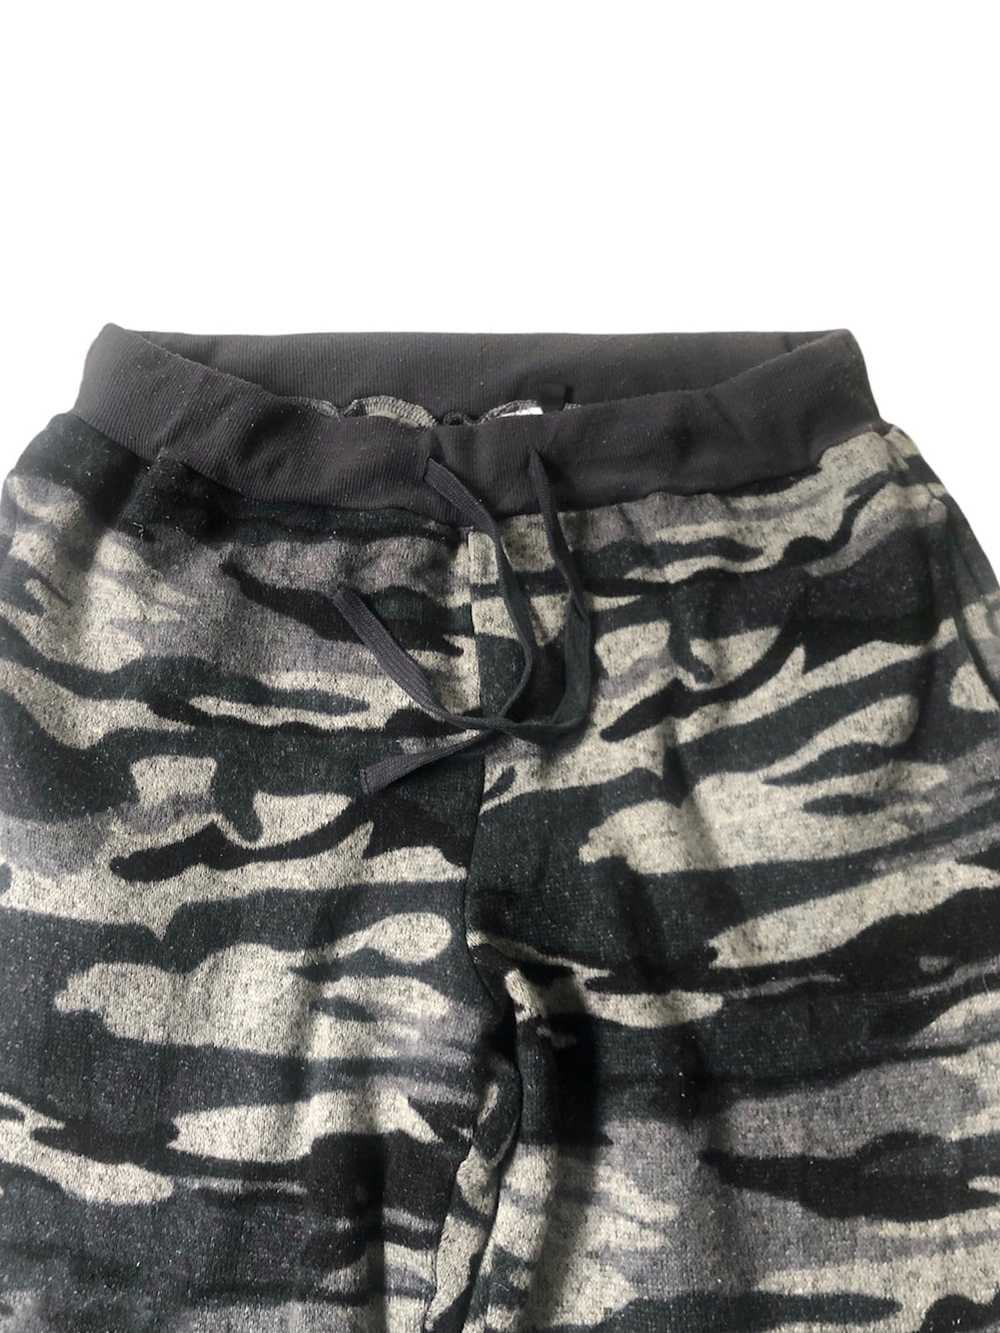 Other 🔥Military Styles Sweatpants - image 4